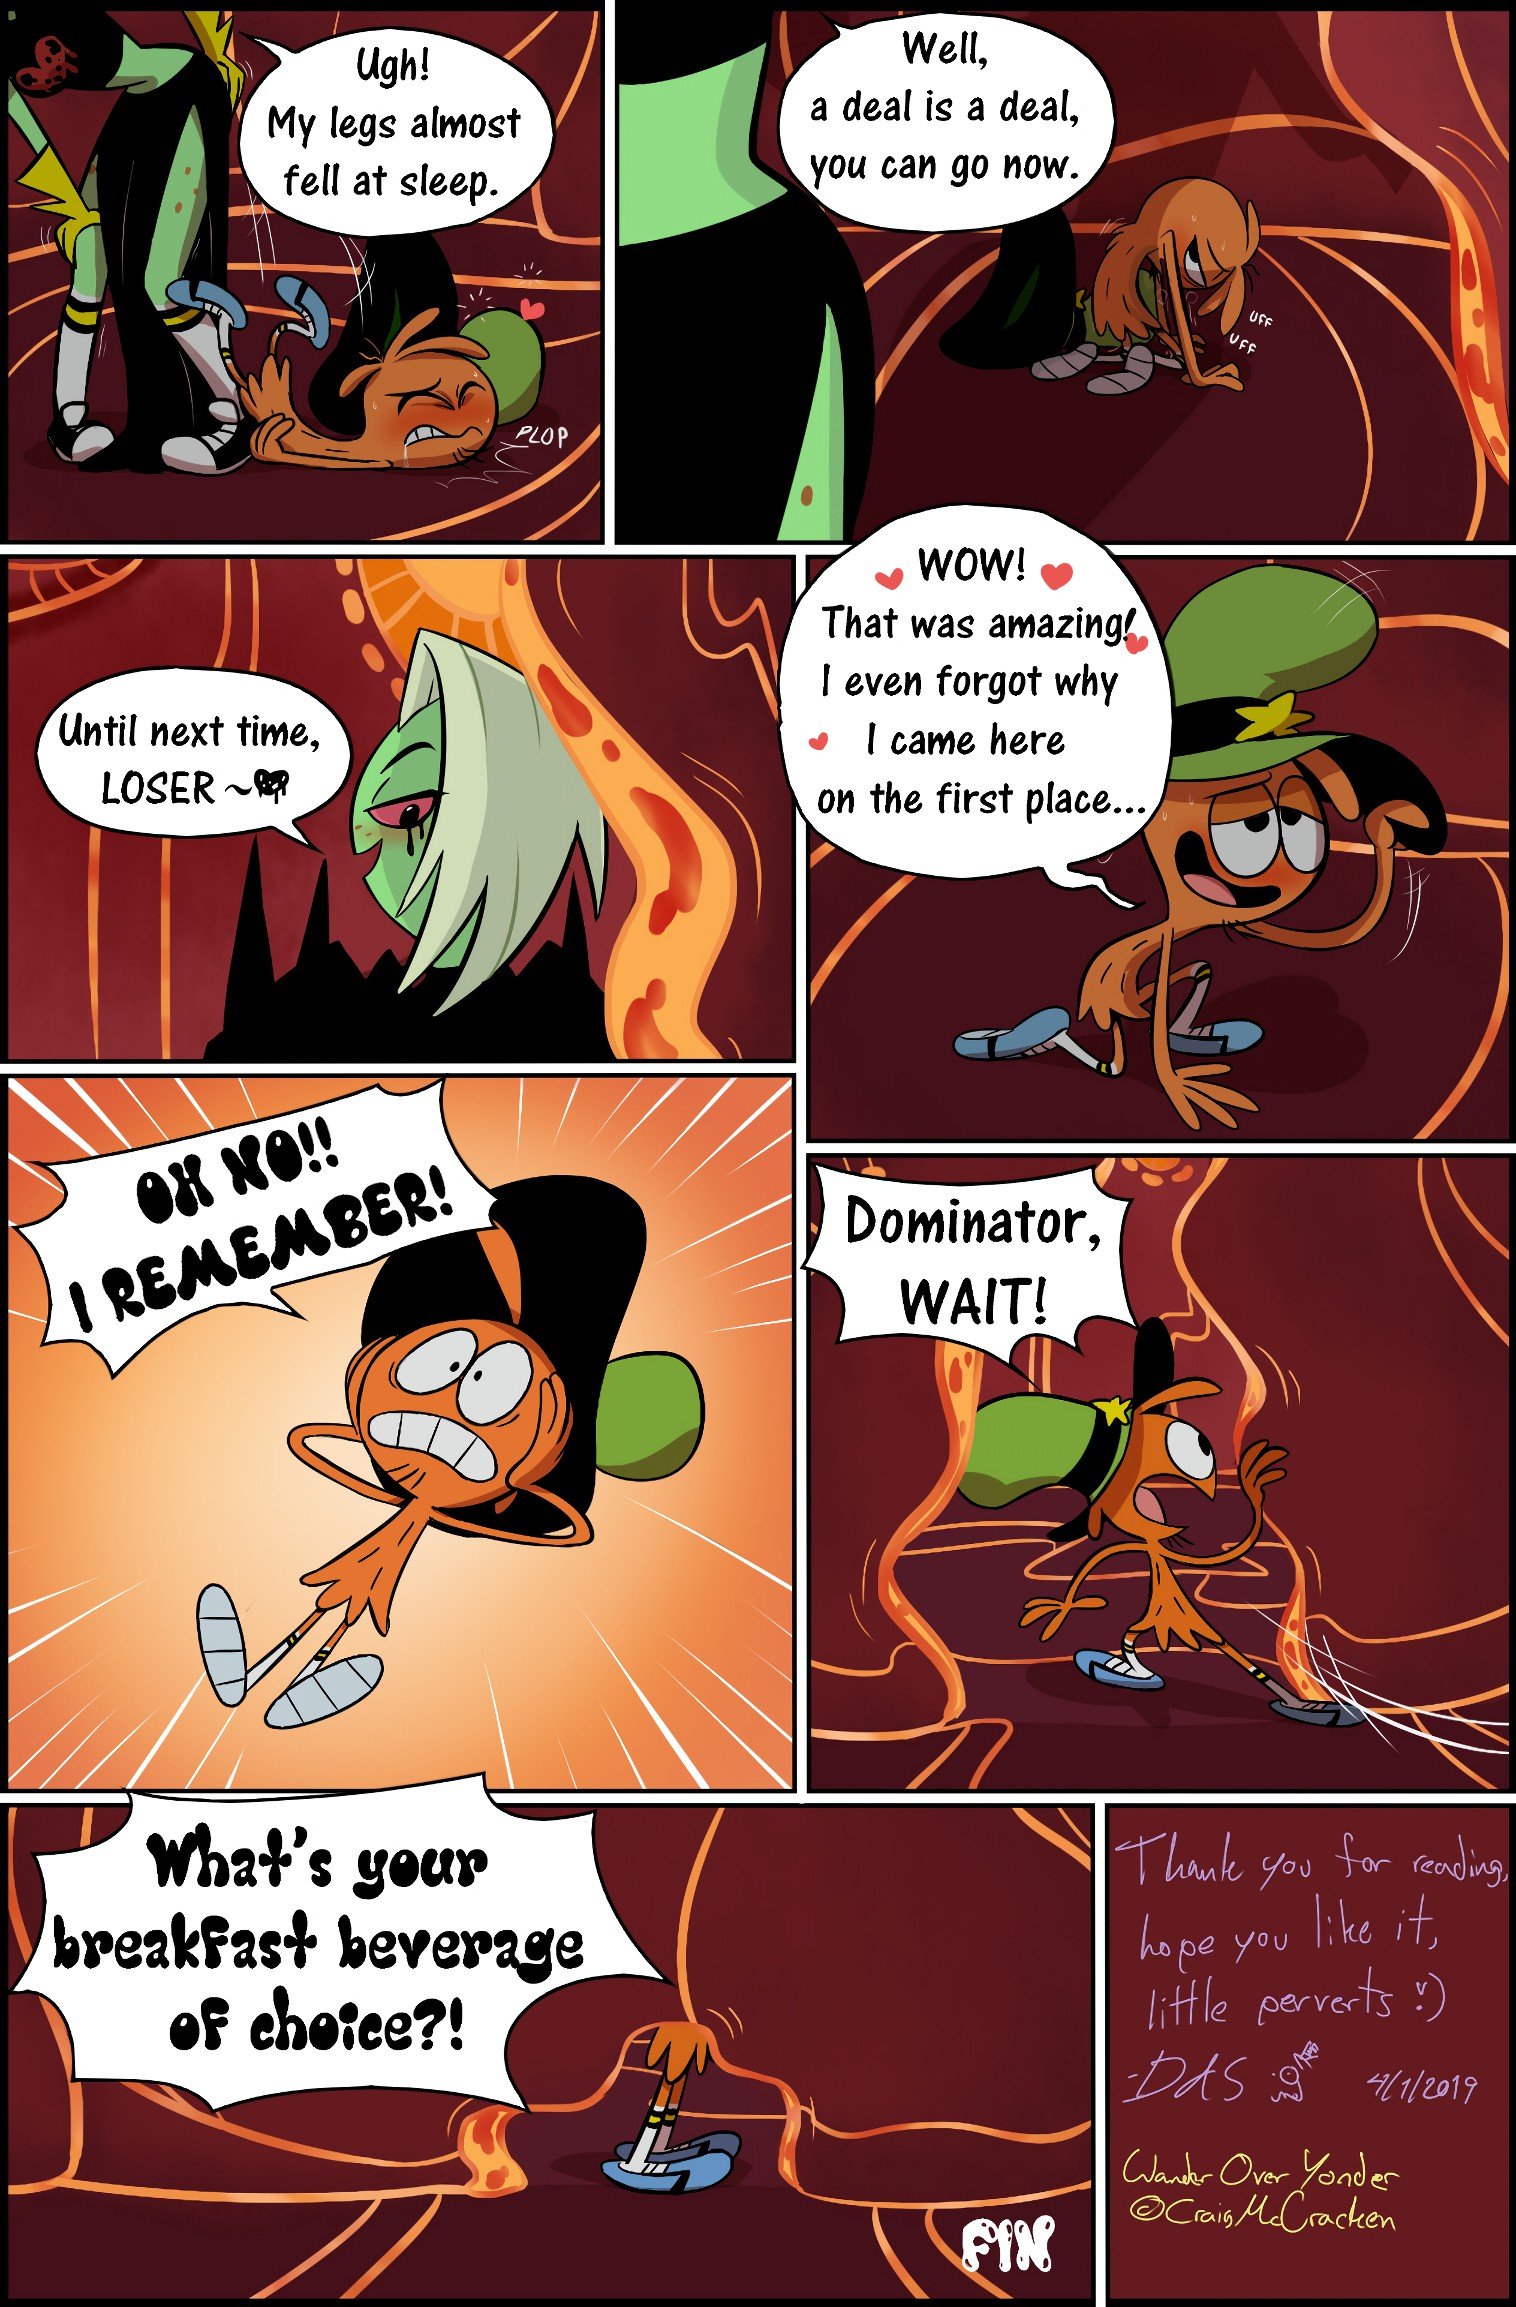 The Deal Wander Over Yonder 10